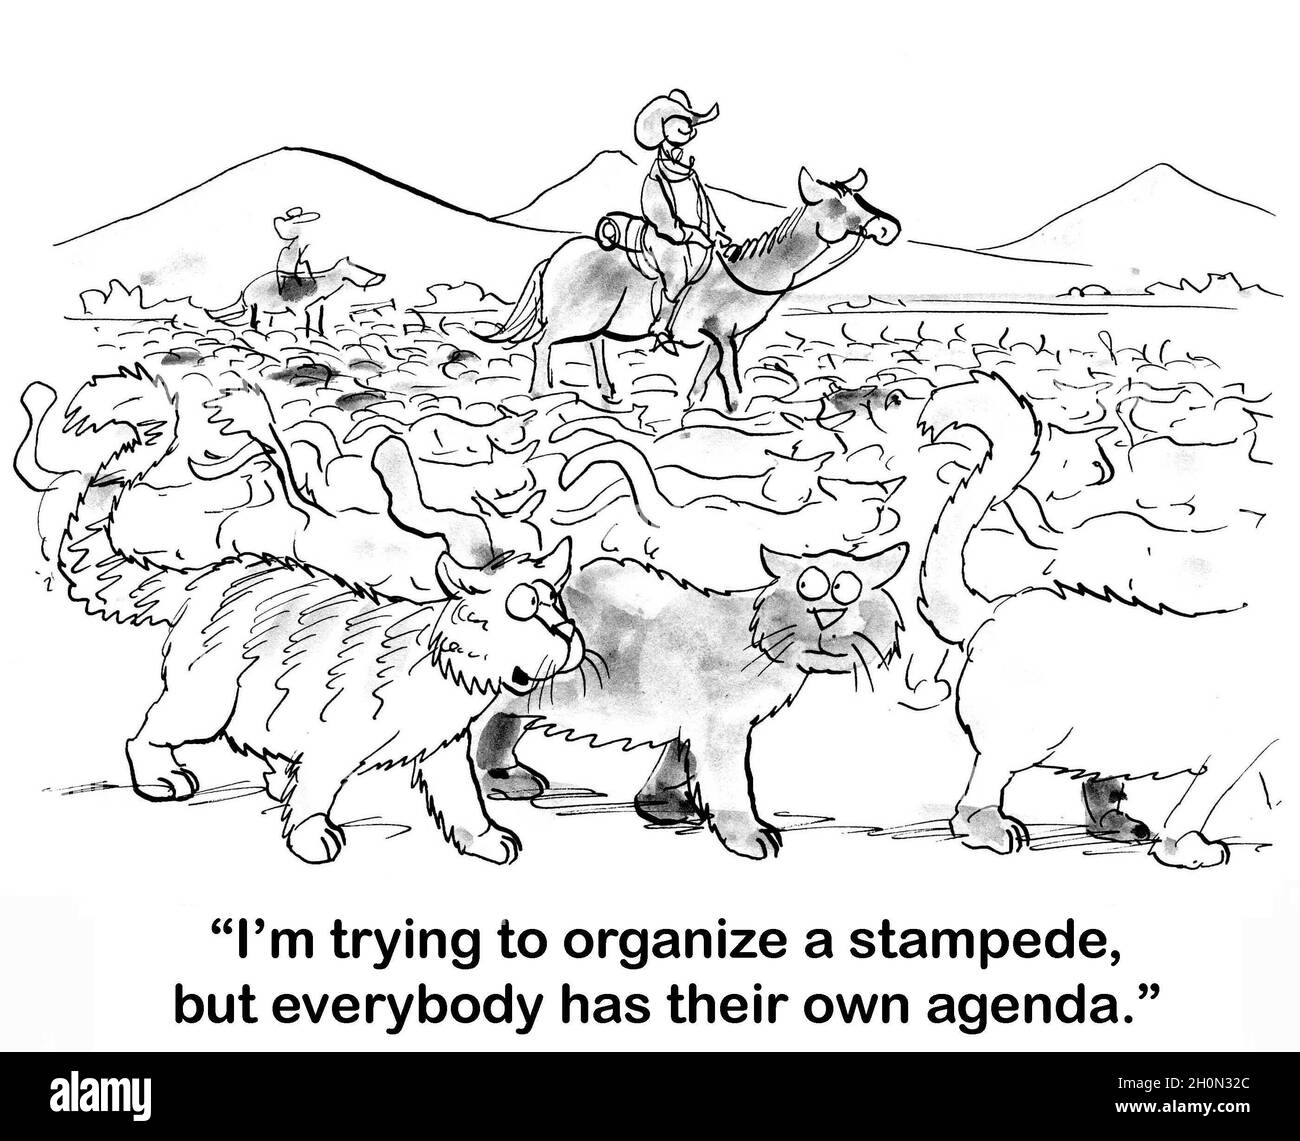 Cat cannot organize stampede Stock Photo